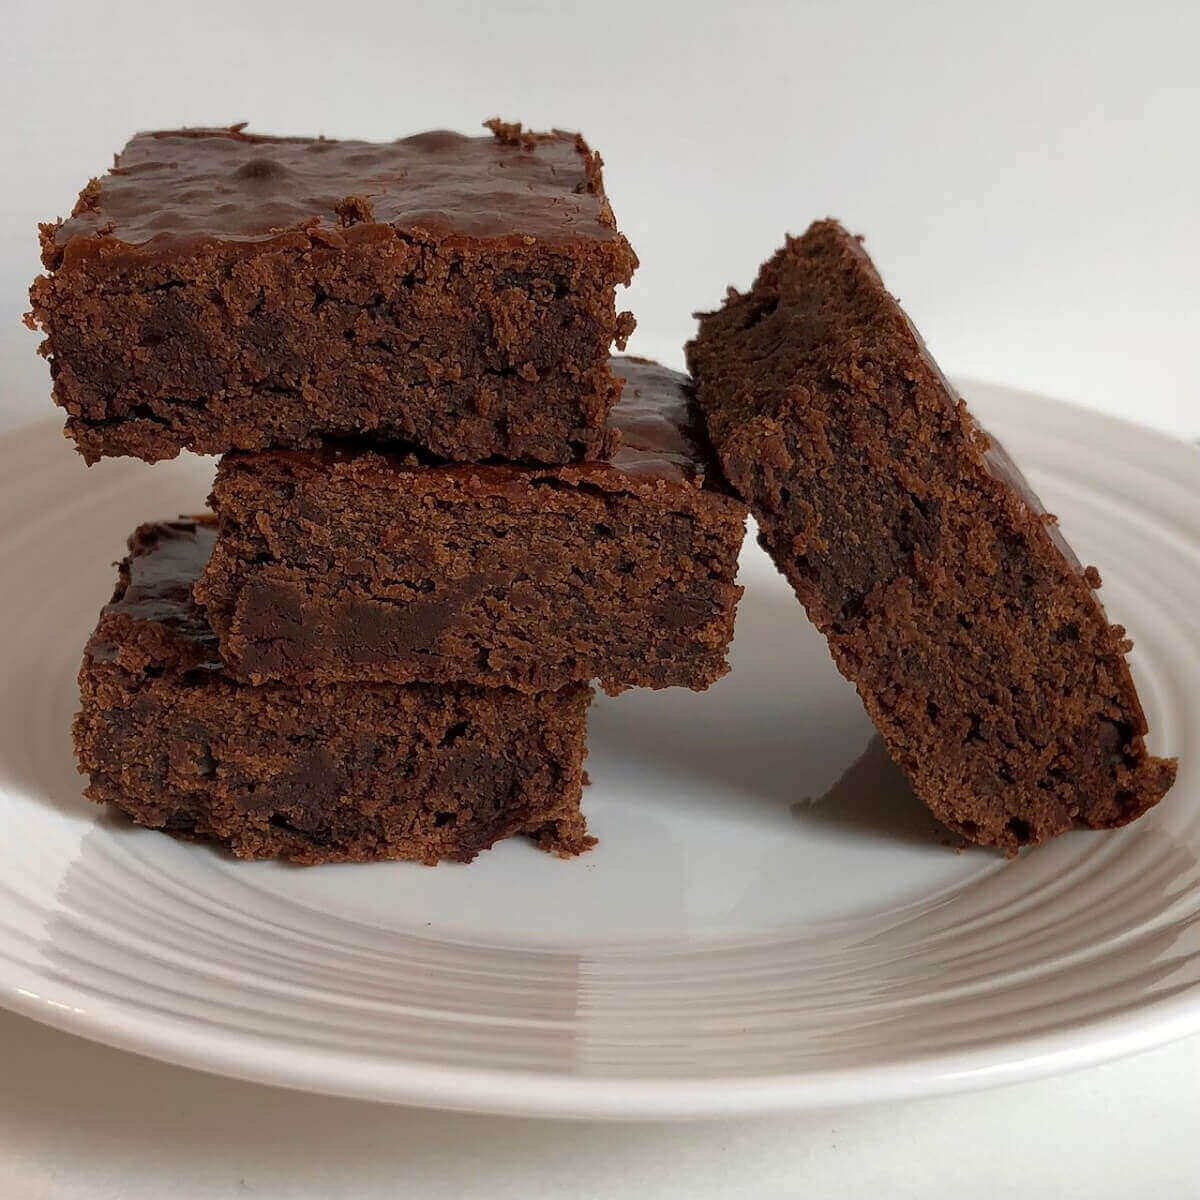 Four brownies on a plate.